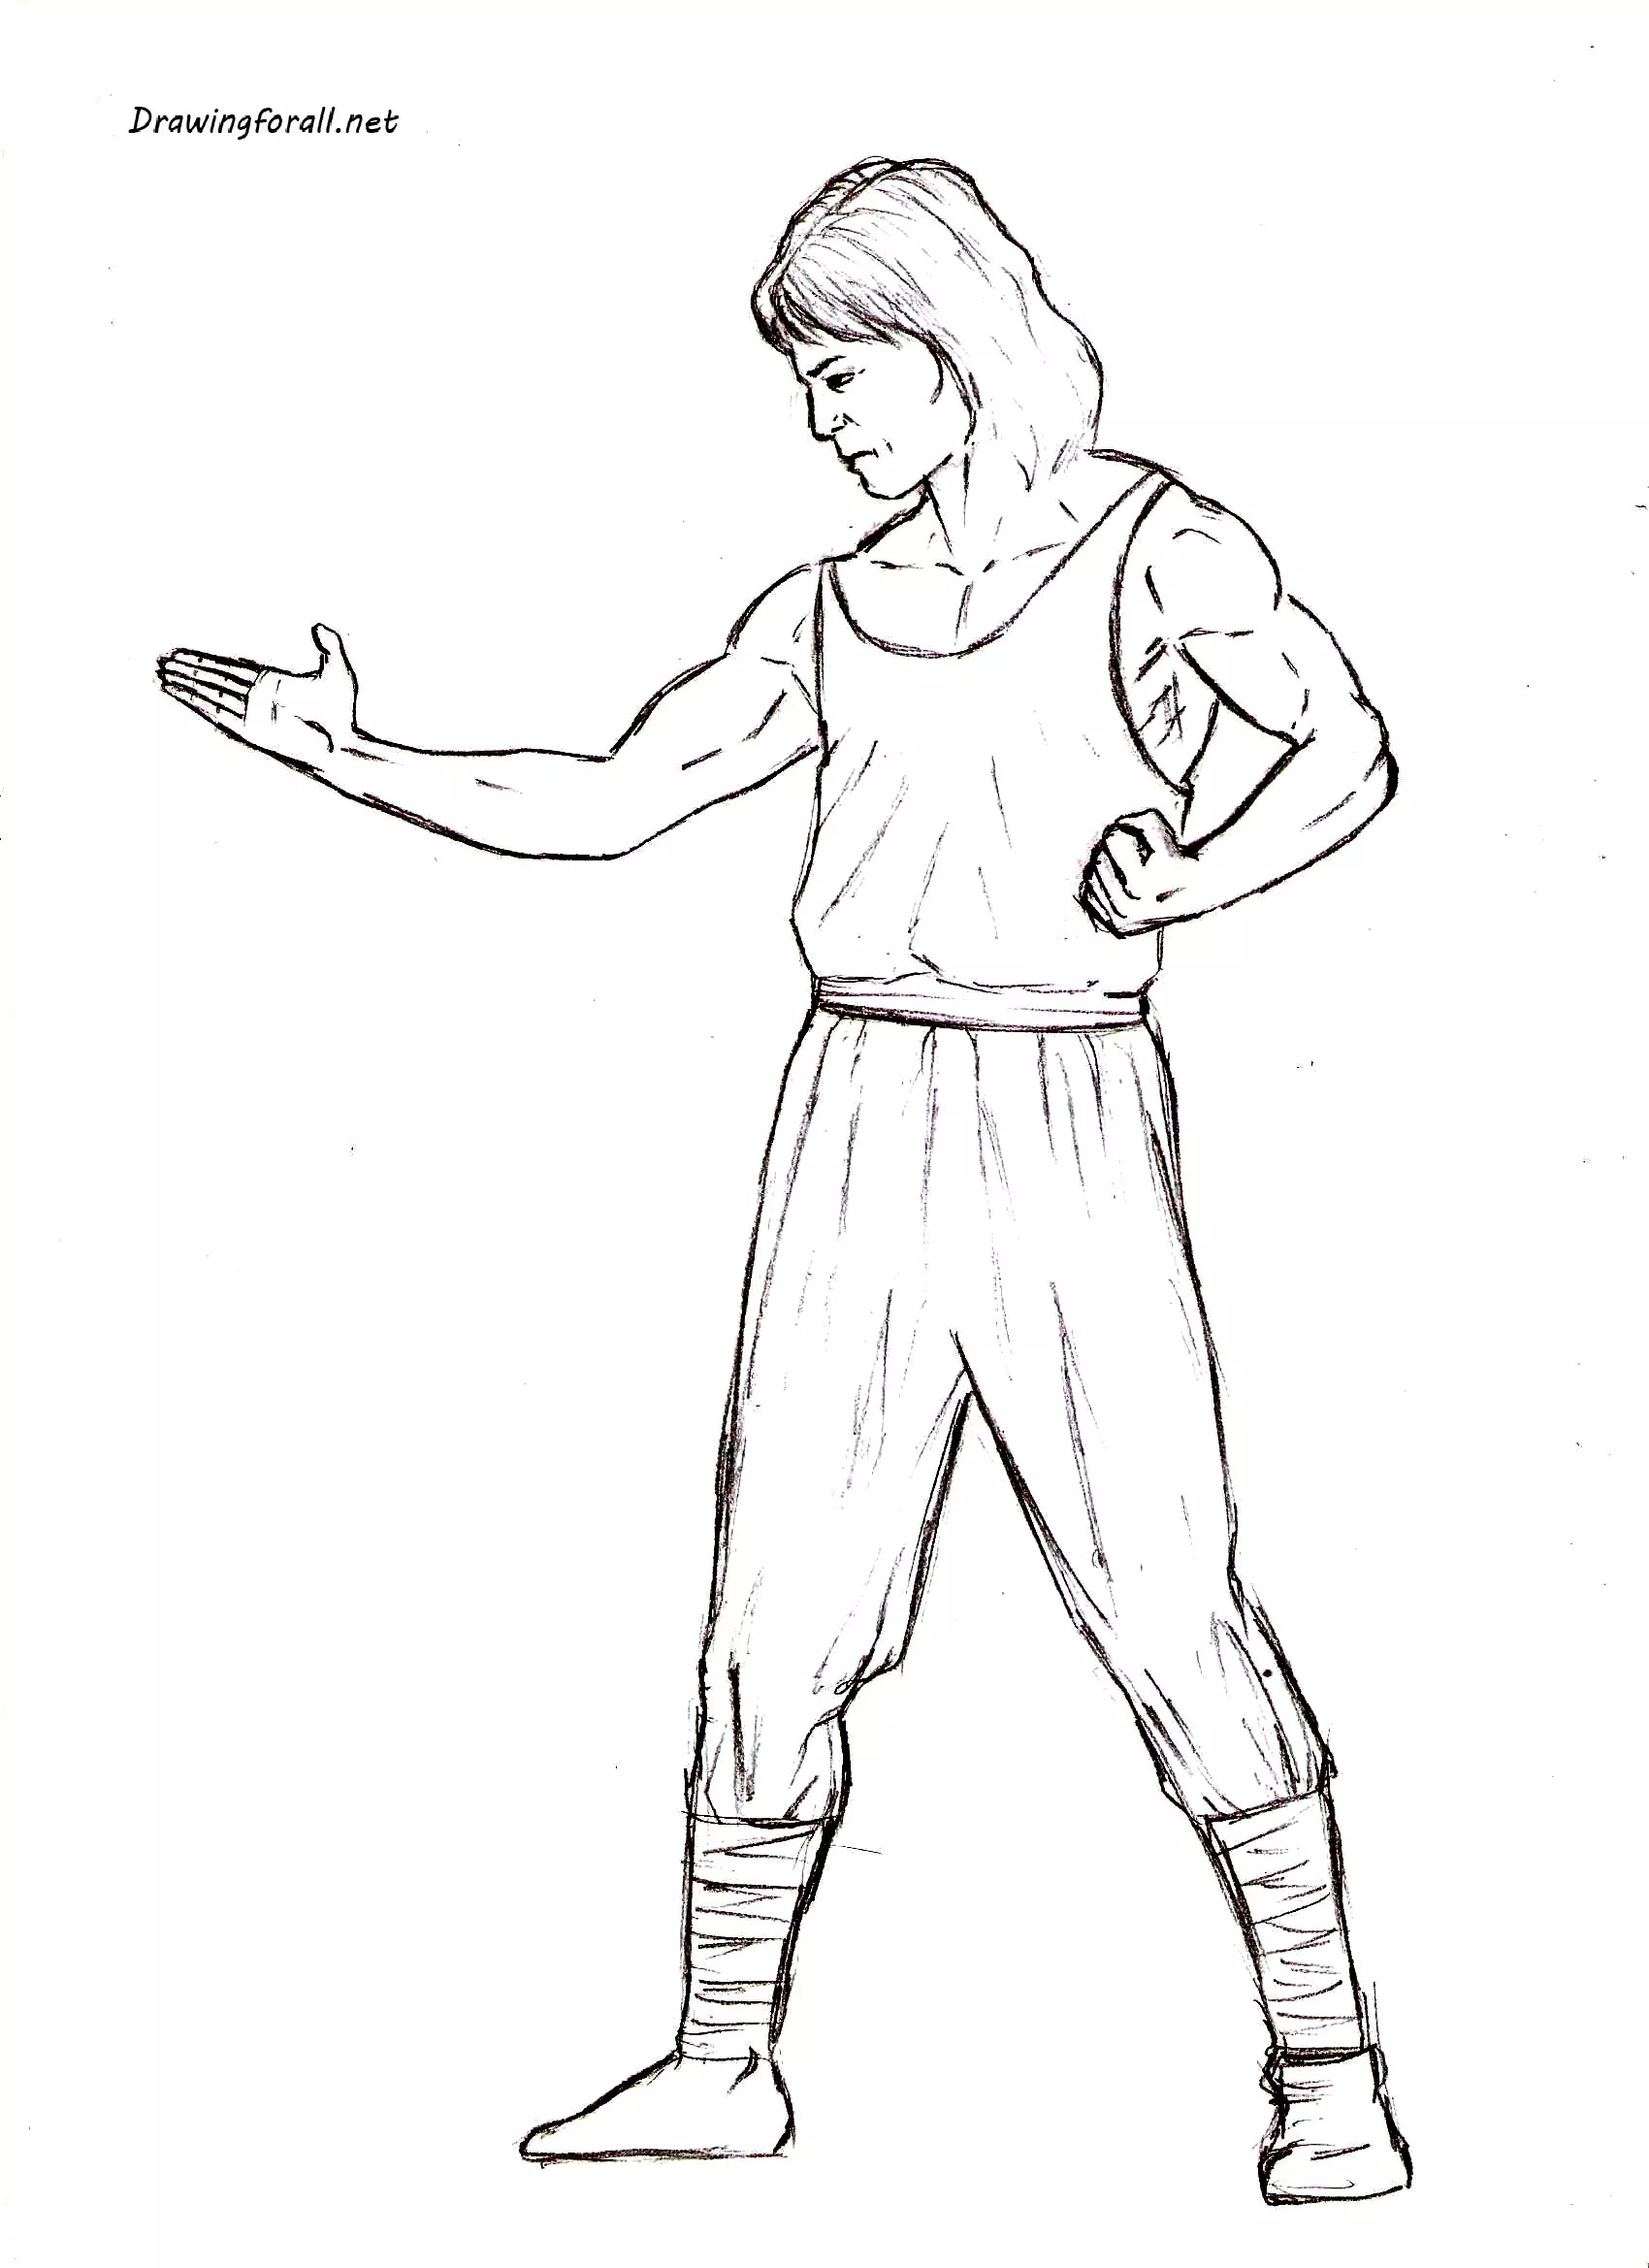 How to draw Liu Kang step by step